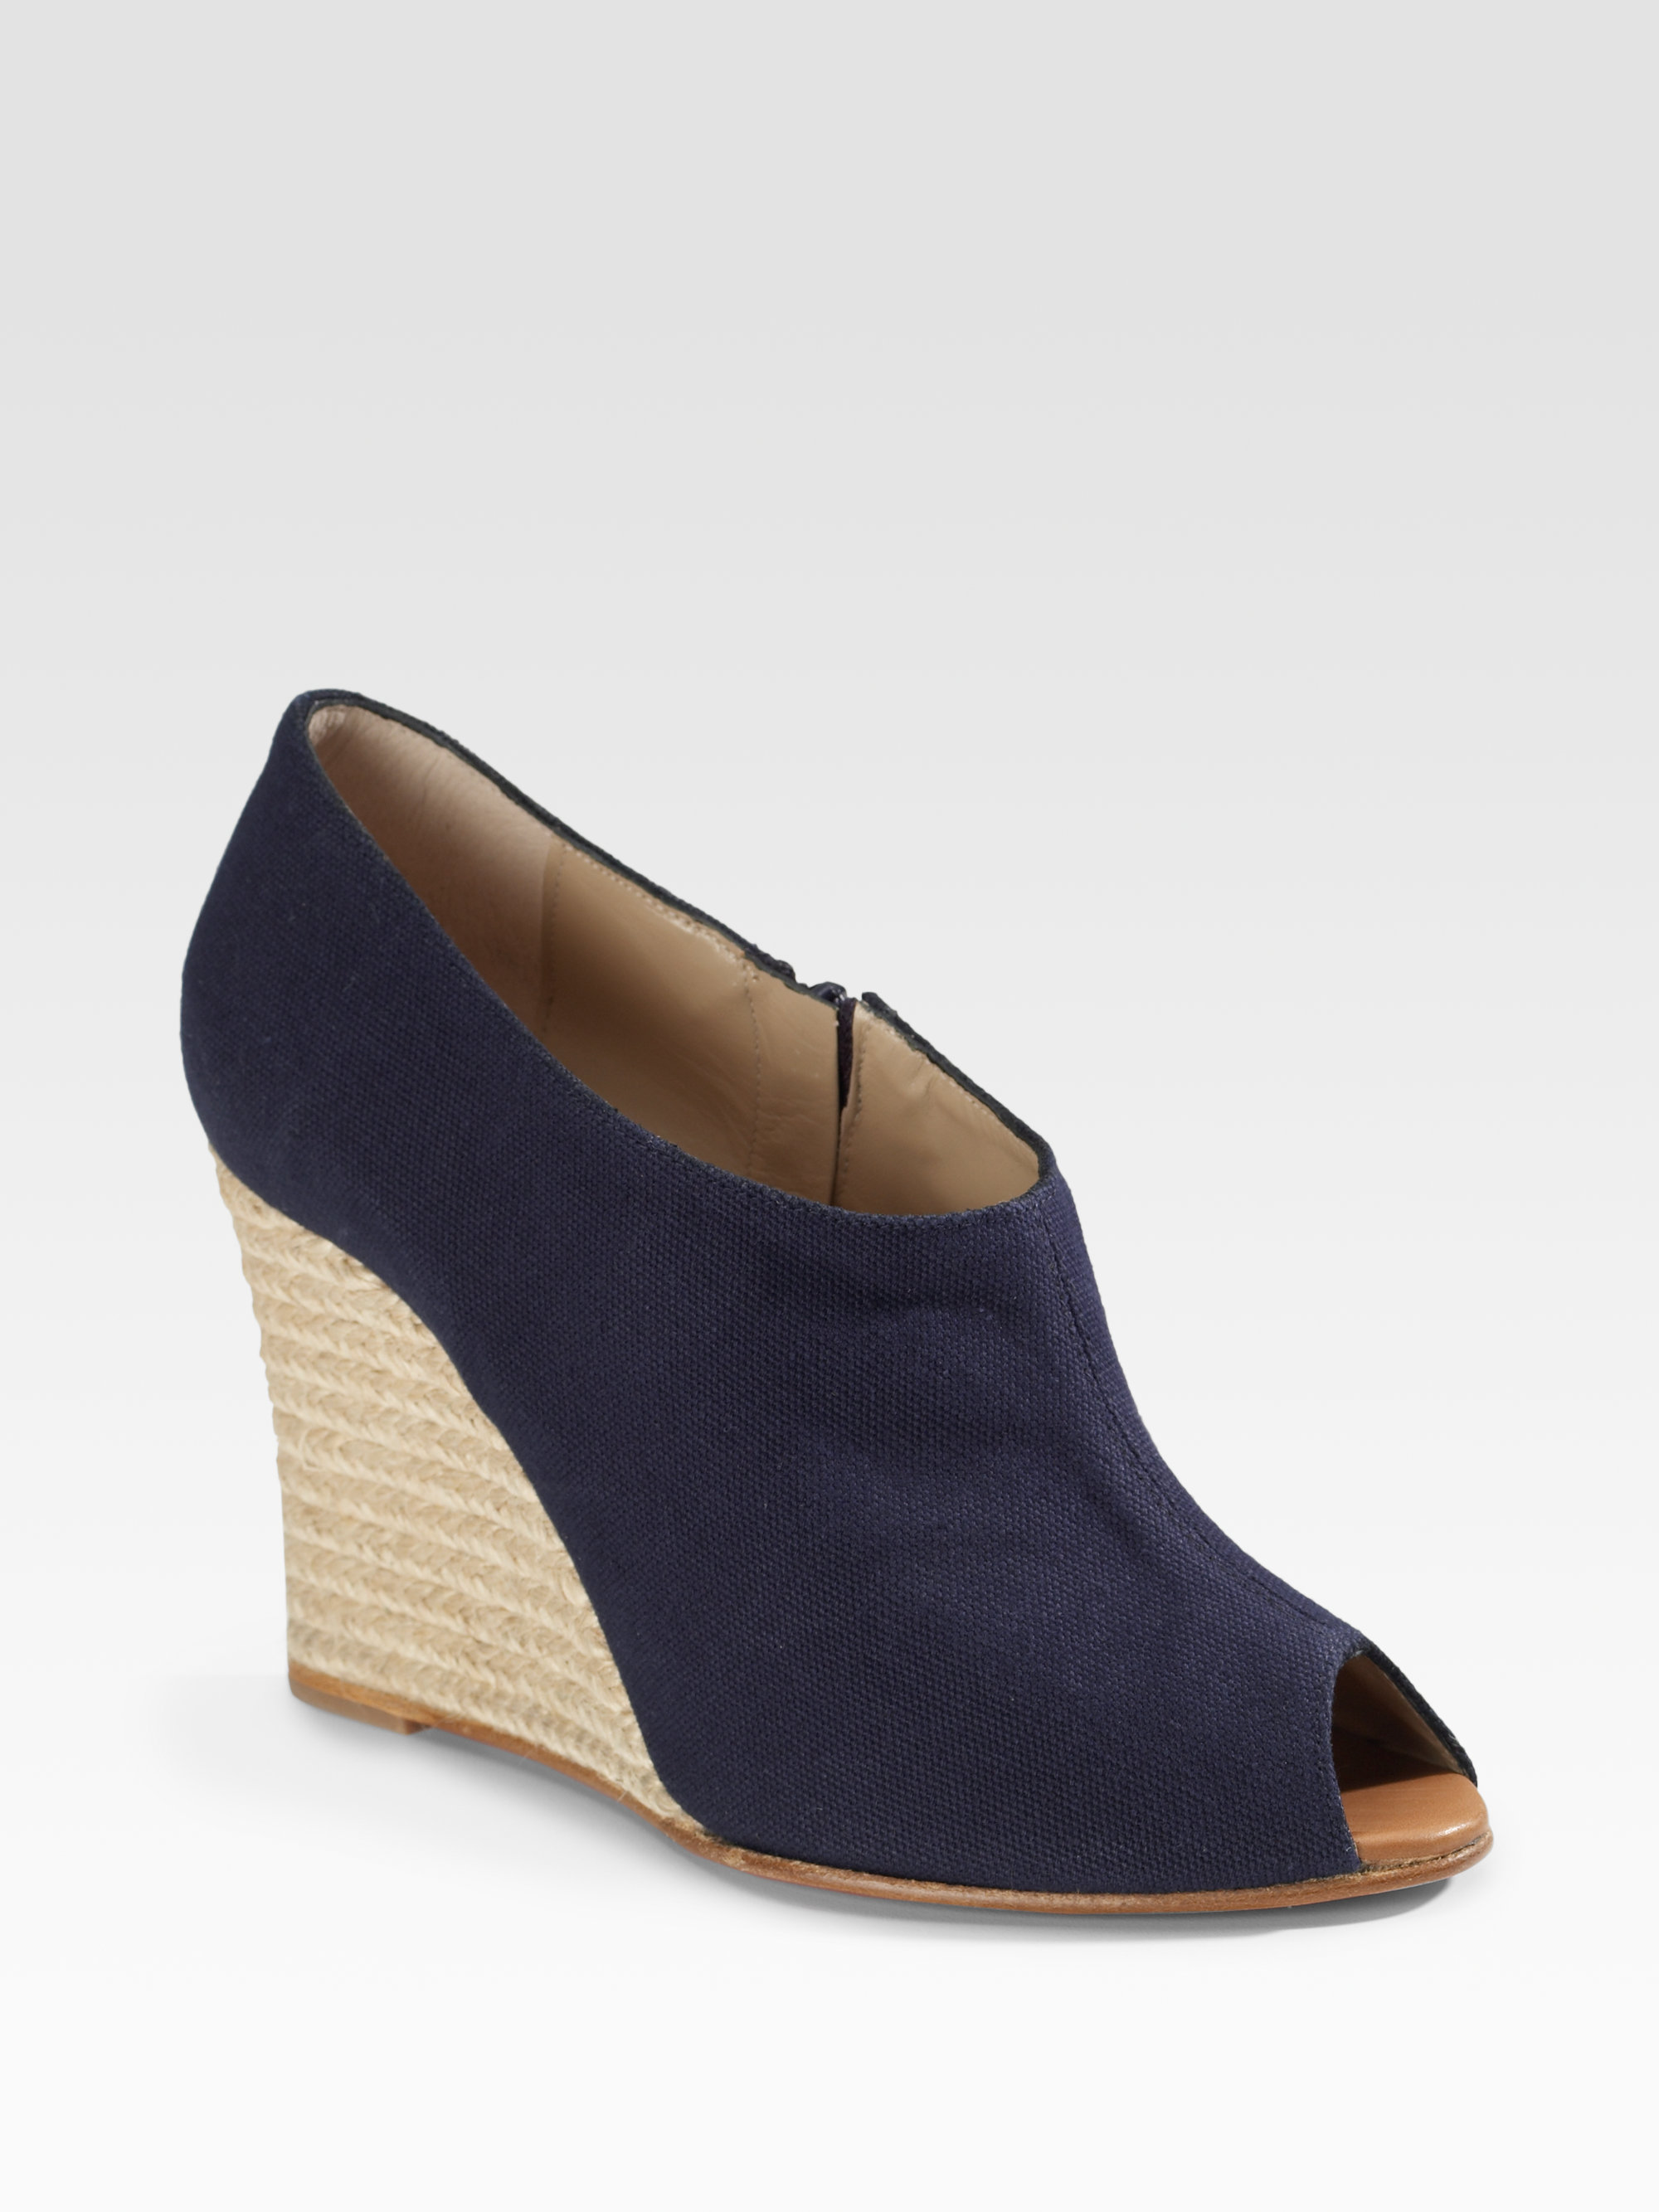 chris louboutin - Christian louboutin Corazon Covered Wedge Espadrilles in Blue ...